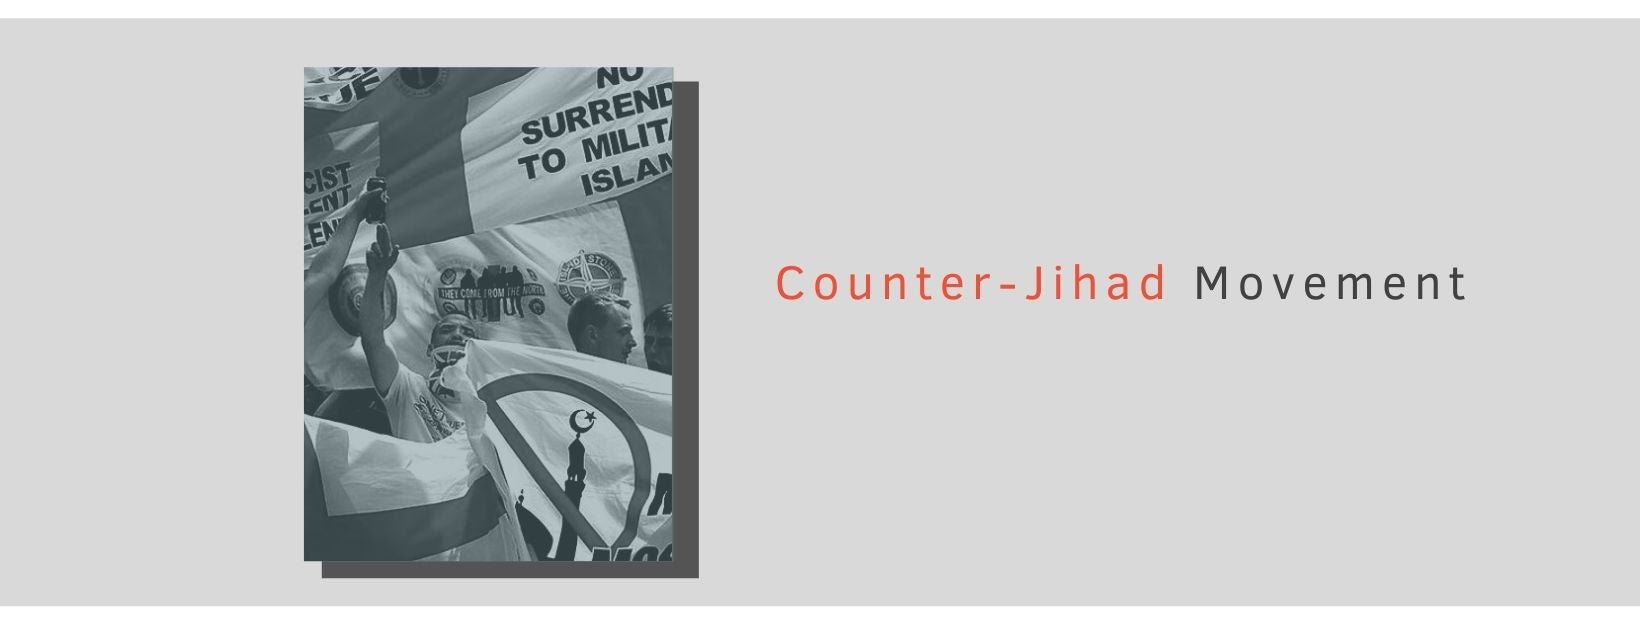 The self-described “Counter-Jihad Movement” (CJM) is a network of European and North American anti-Muslim movements, institutions, political parties, authors, bloggers, and activists who claim that ‘Western civilization’ is “under attack” by Islam.